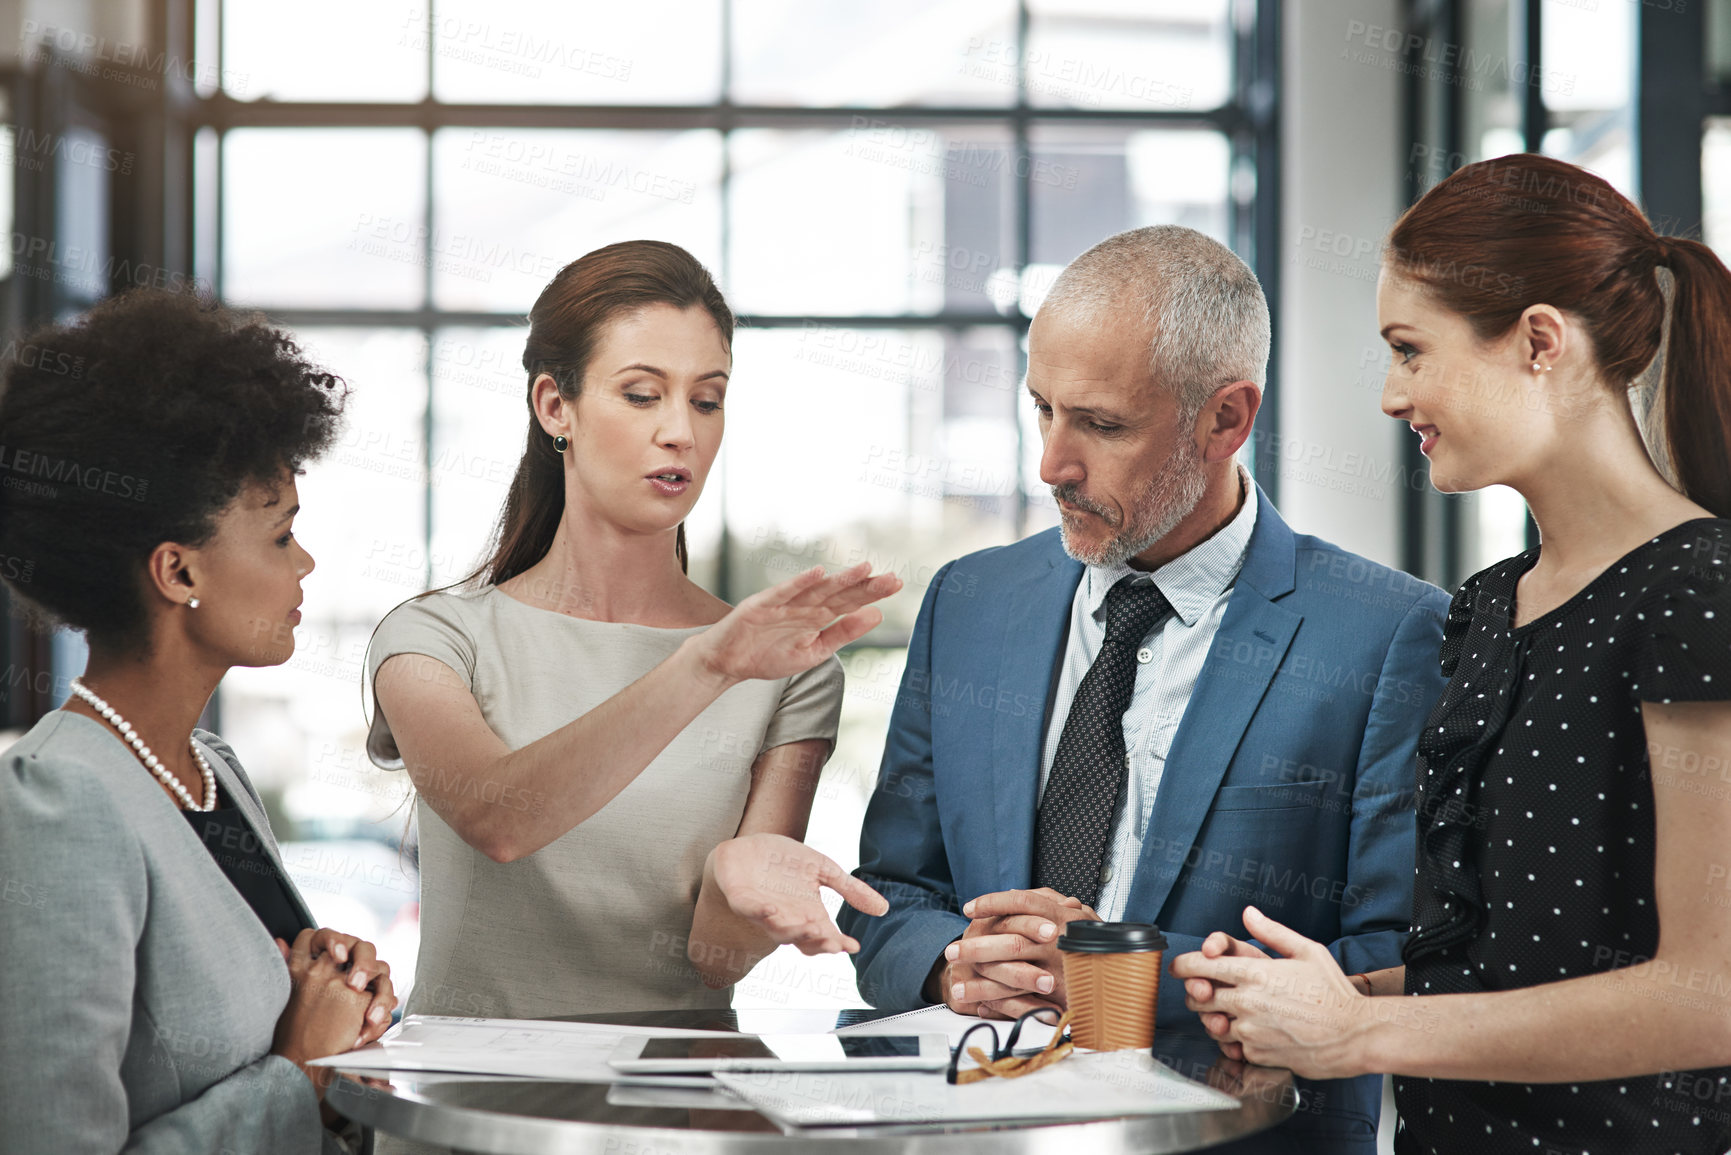 Buy stock photo Cropped shot of a group of businesspeople having a meeting in a modern office